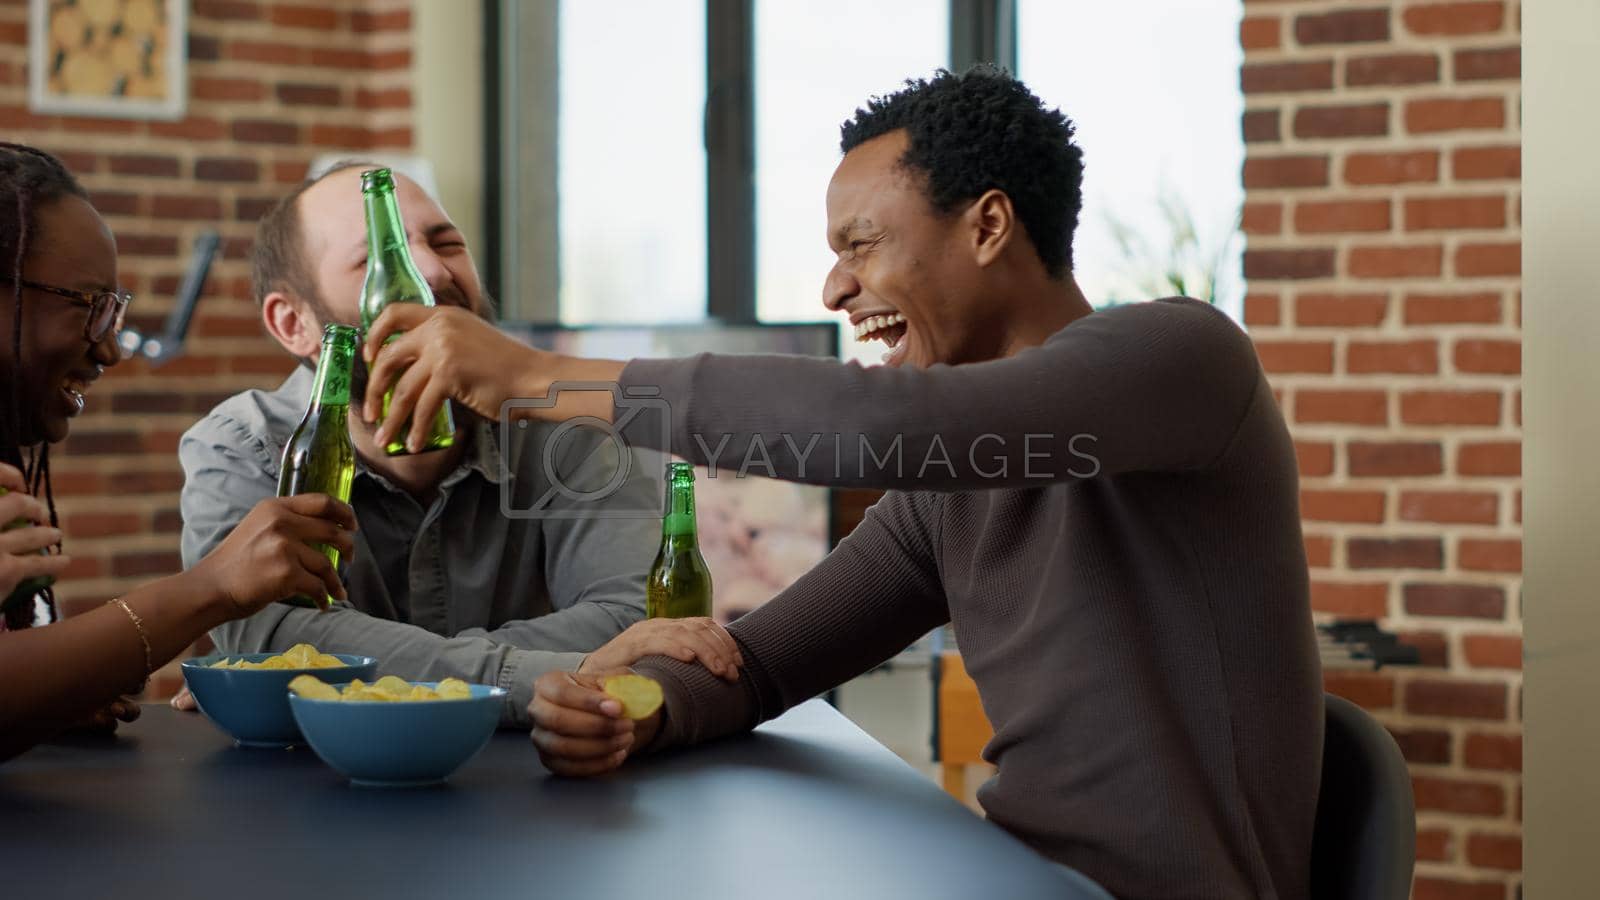 Modern group of friends laughing together at jokes, gathering to have fun with drinks and snacks in living room. Happy men and women smiling and having conversation about board games.